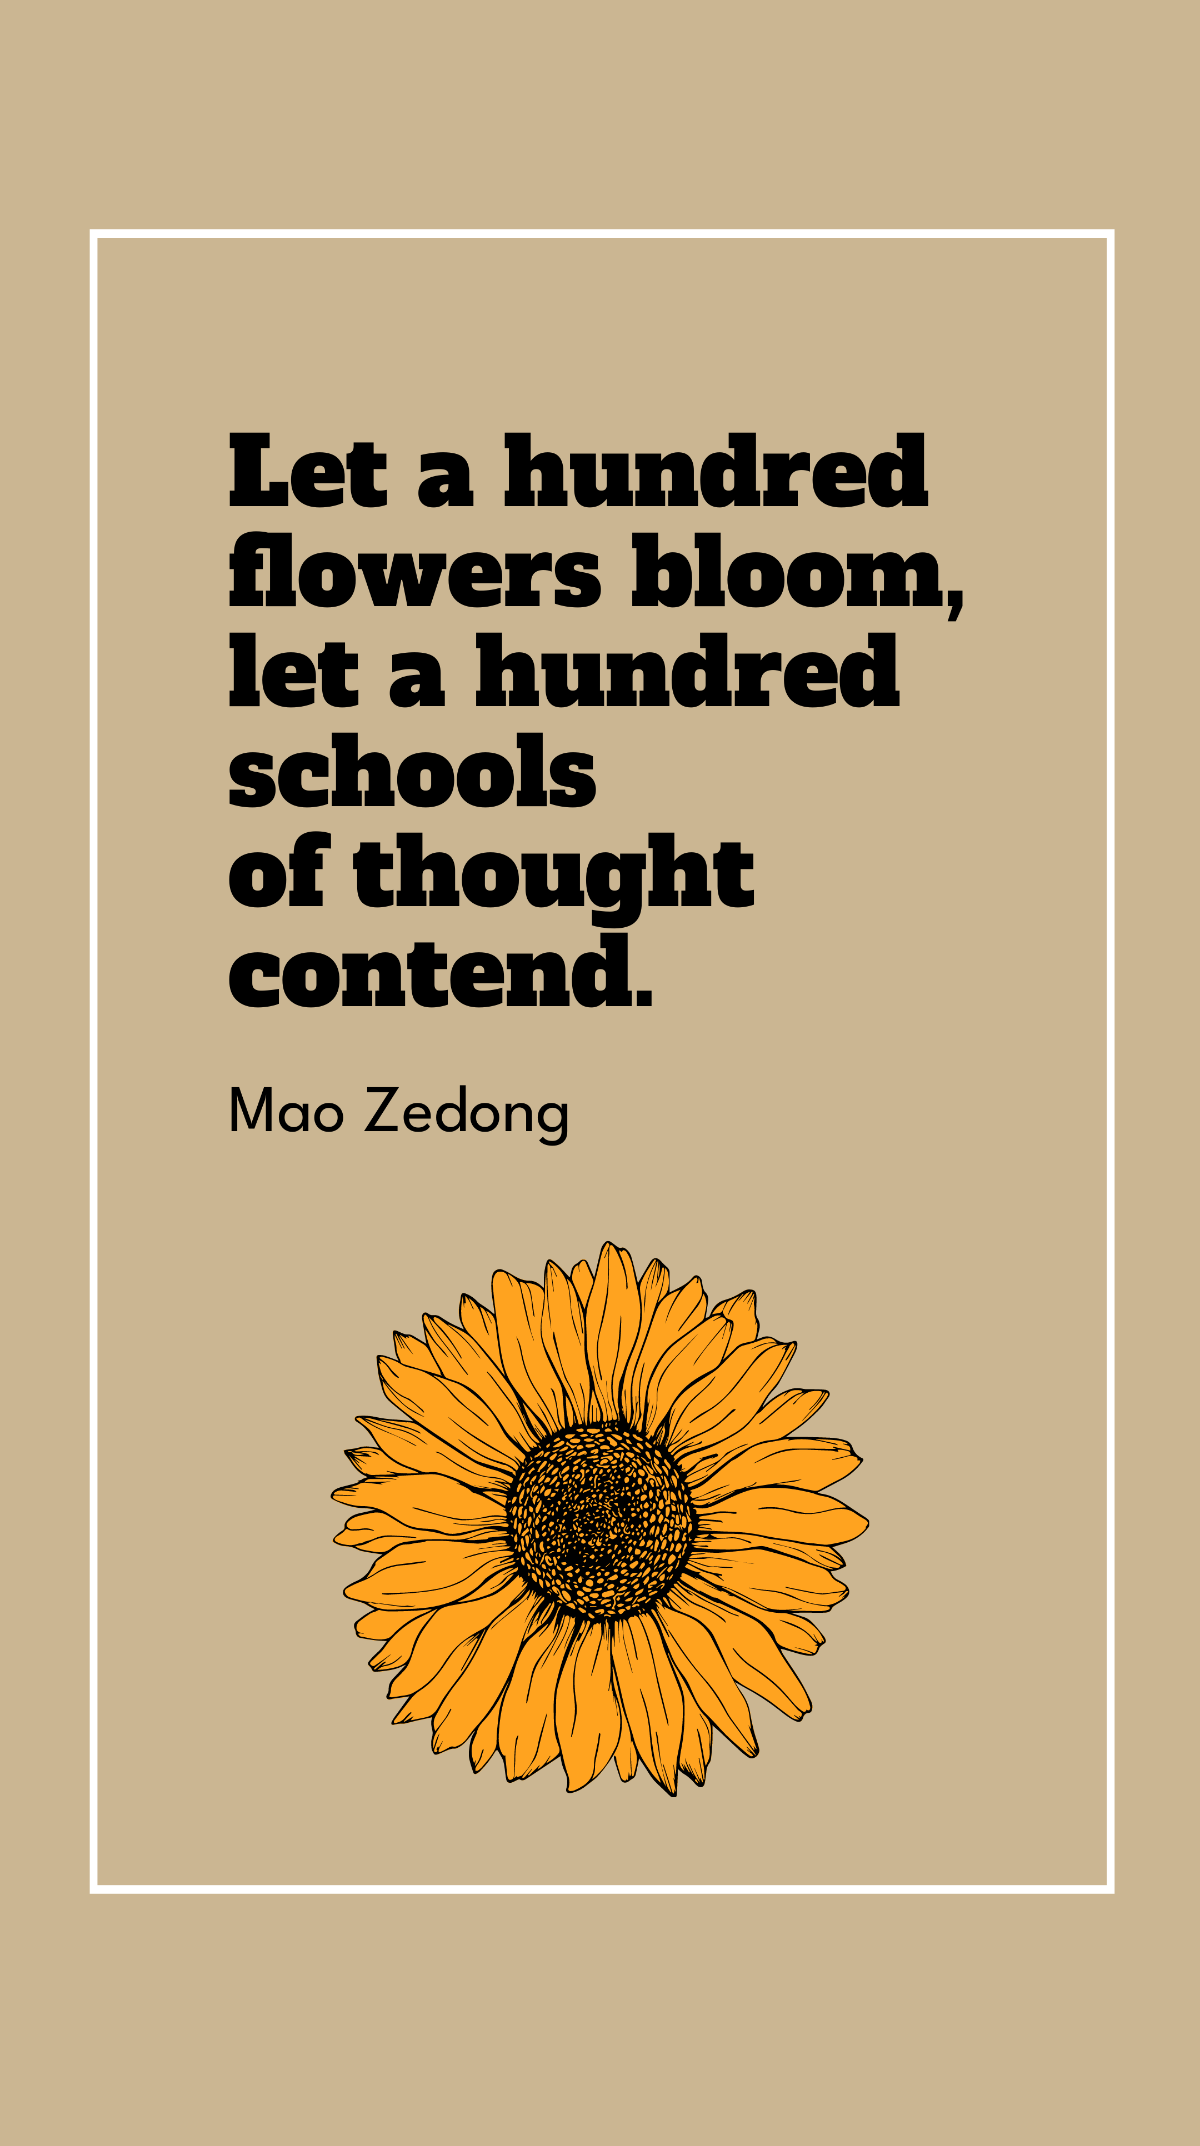 Mao Zedong - Let a hundred flowers bloom, let a hundred schools of thought contend. Template